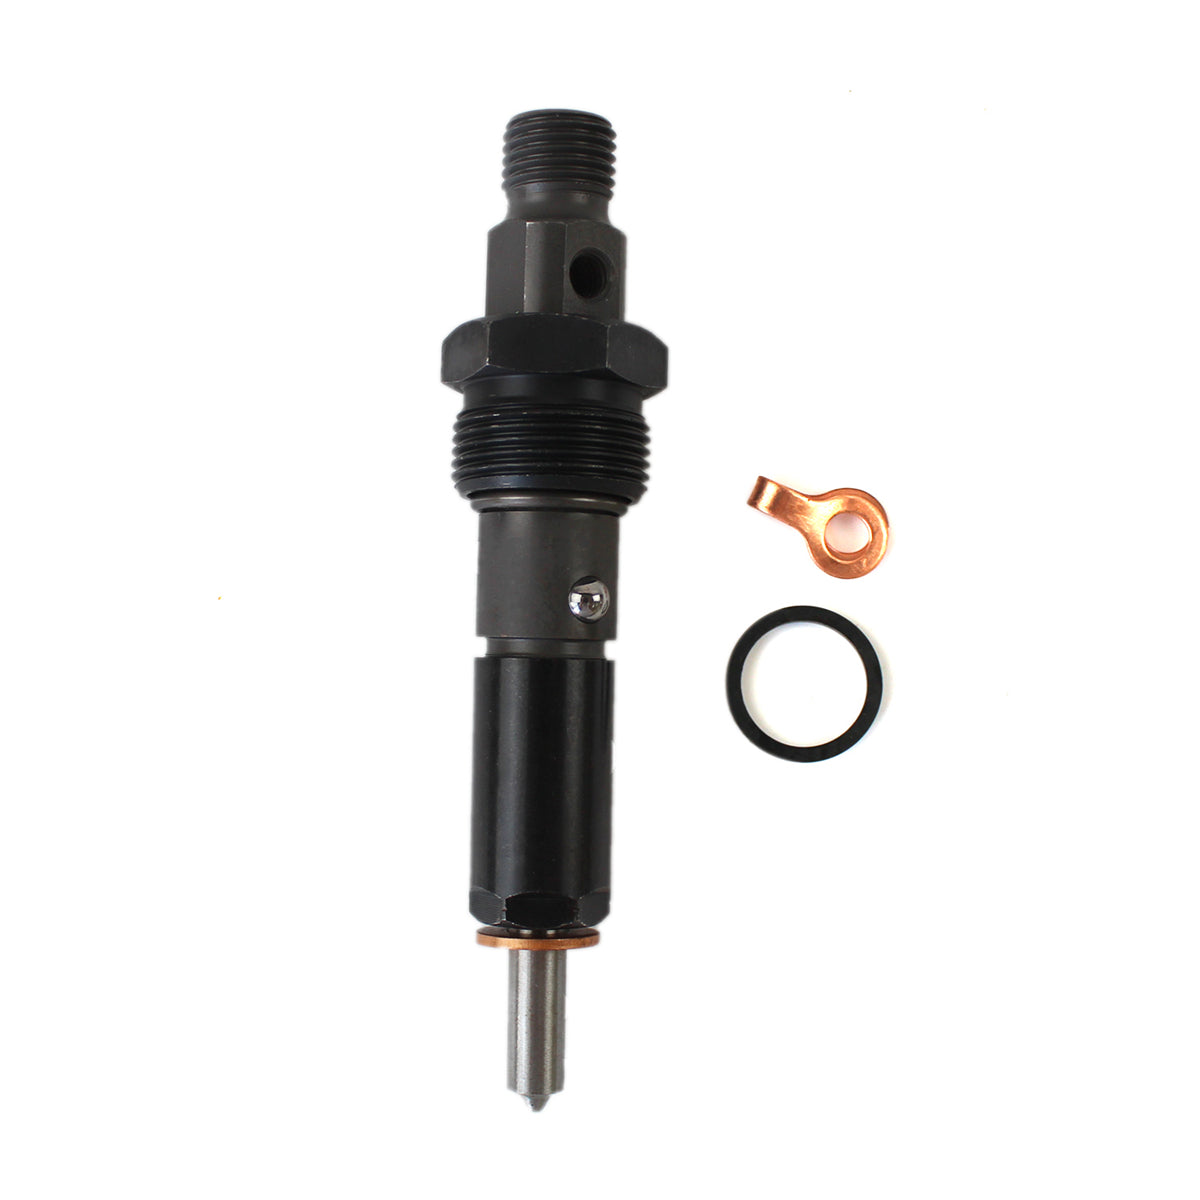 Fuel Injector 3283562 KDAL59P6 for 1989-1993 Cummins, Daysyore Fuel Injector, Car Fuel Injector